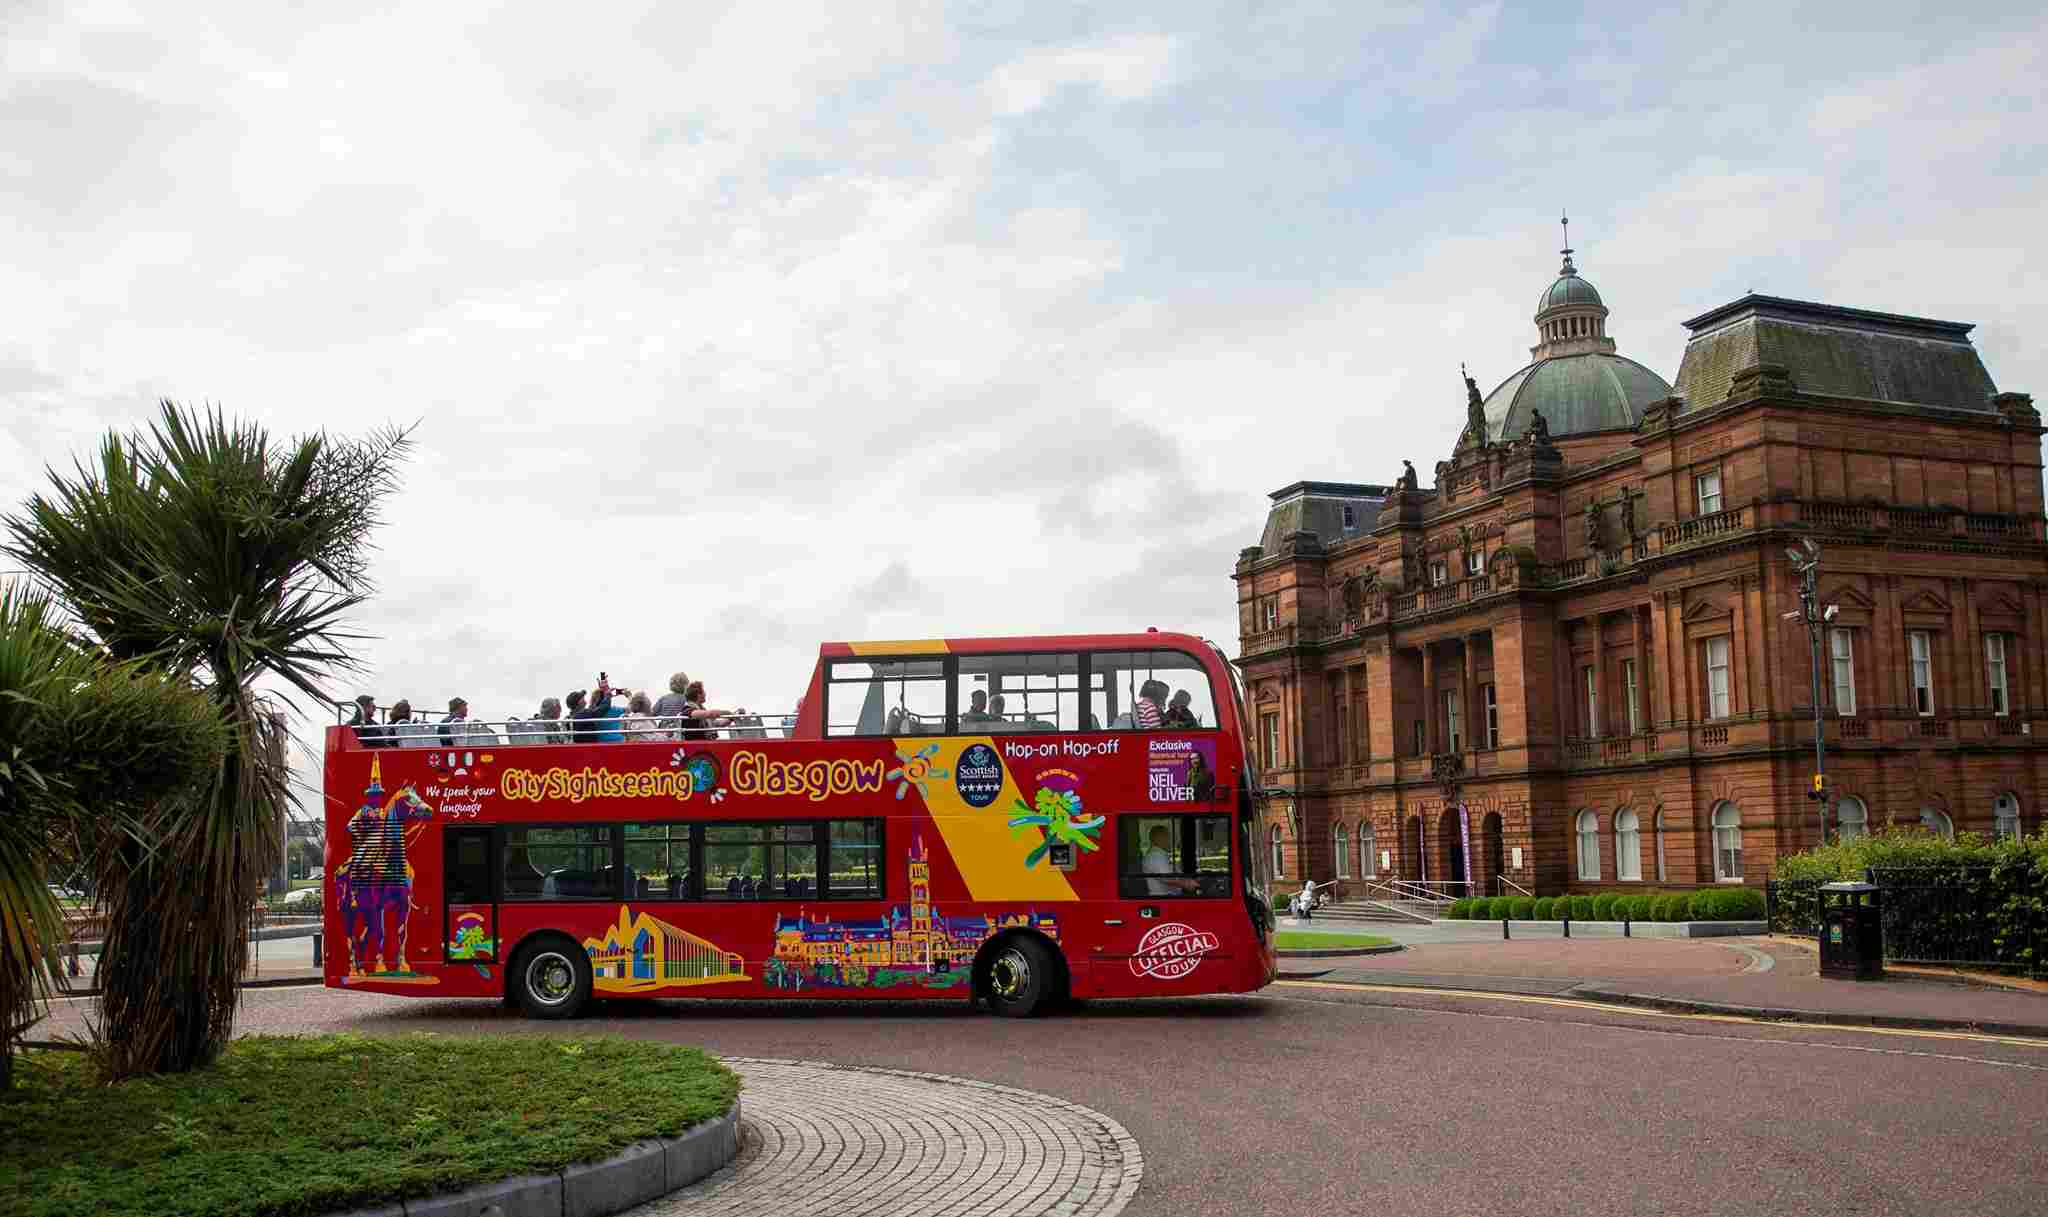 The city has 21 stops and you can choose to get on the bus anywhere and then hop off to explore. Buy Glasgow Bus Tour tickets.